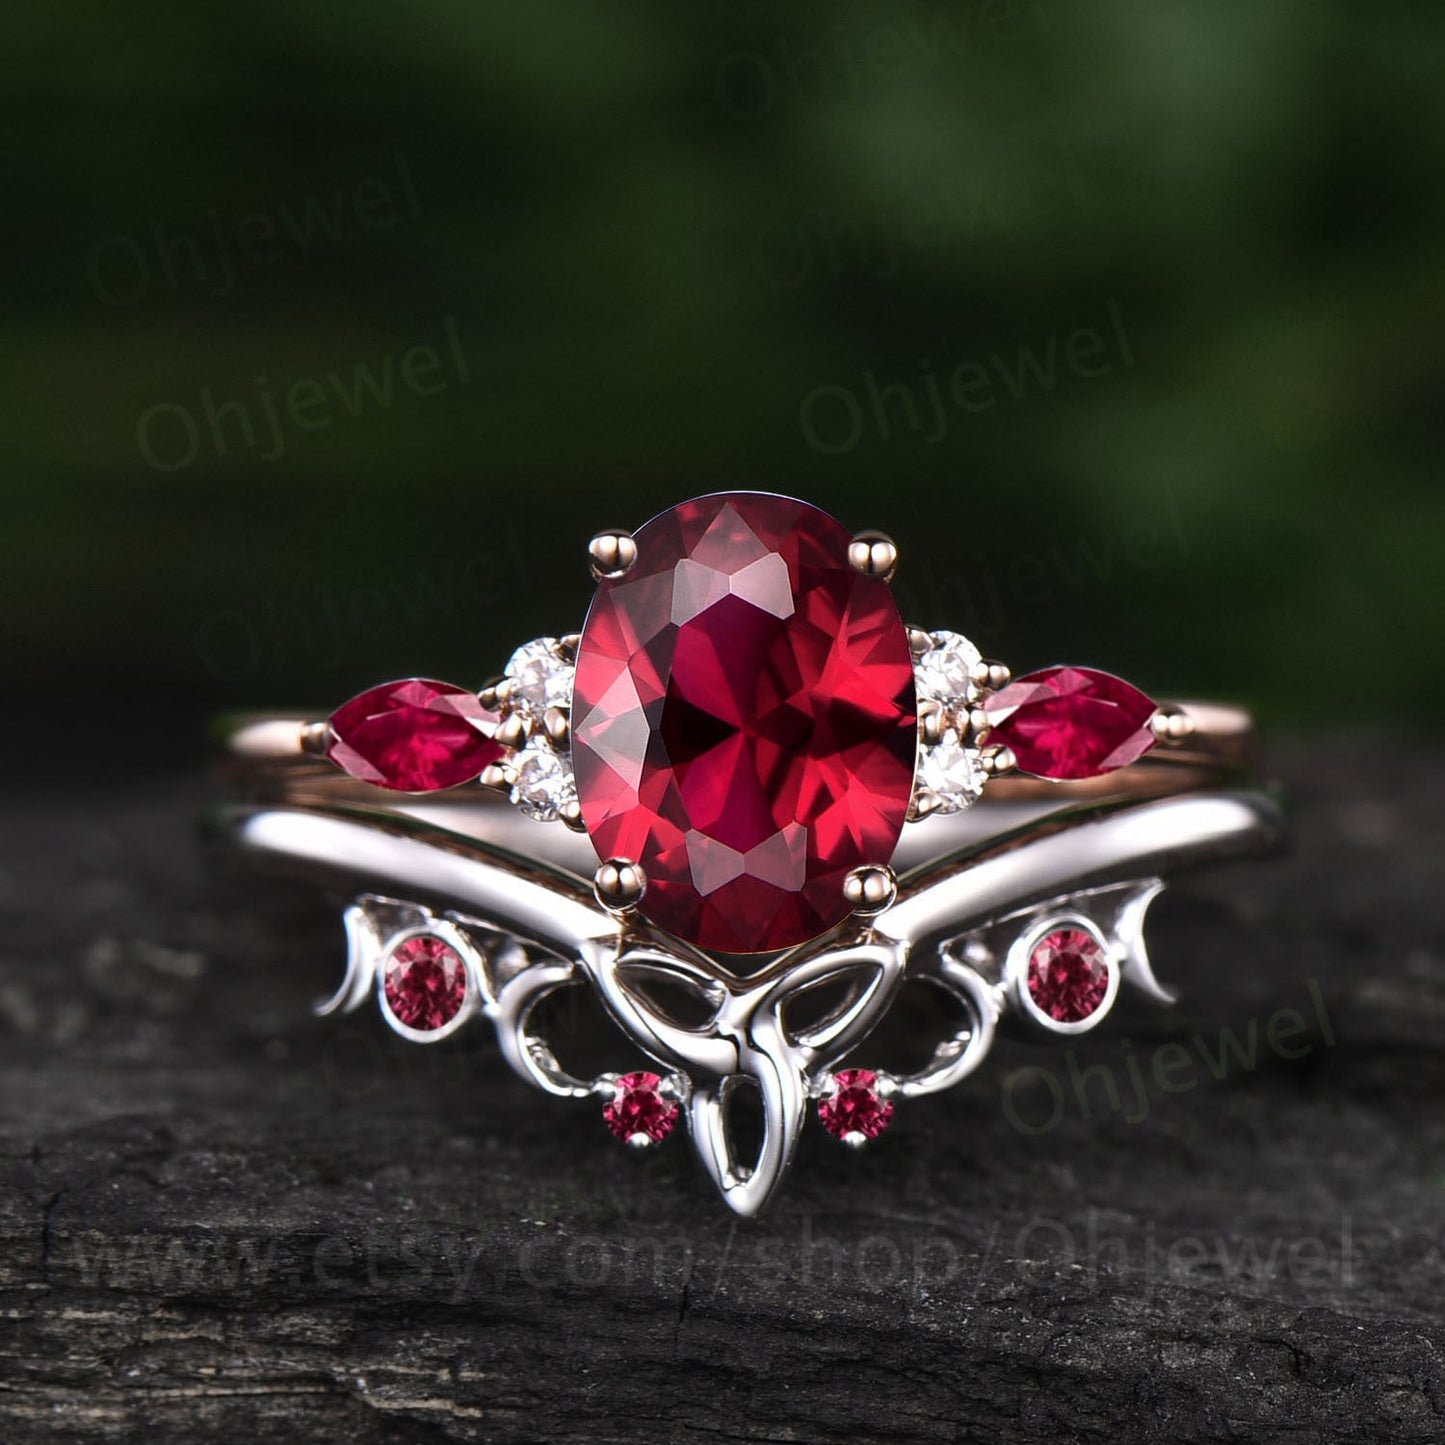 Oval cut red ruby ring vintage unique engagement ring set rose gold cluster marquise cut ruby jewelry anniversary wedding ring women gift